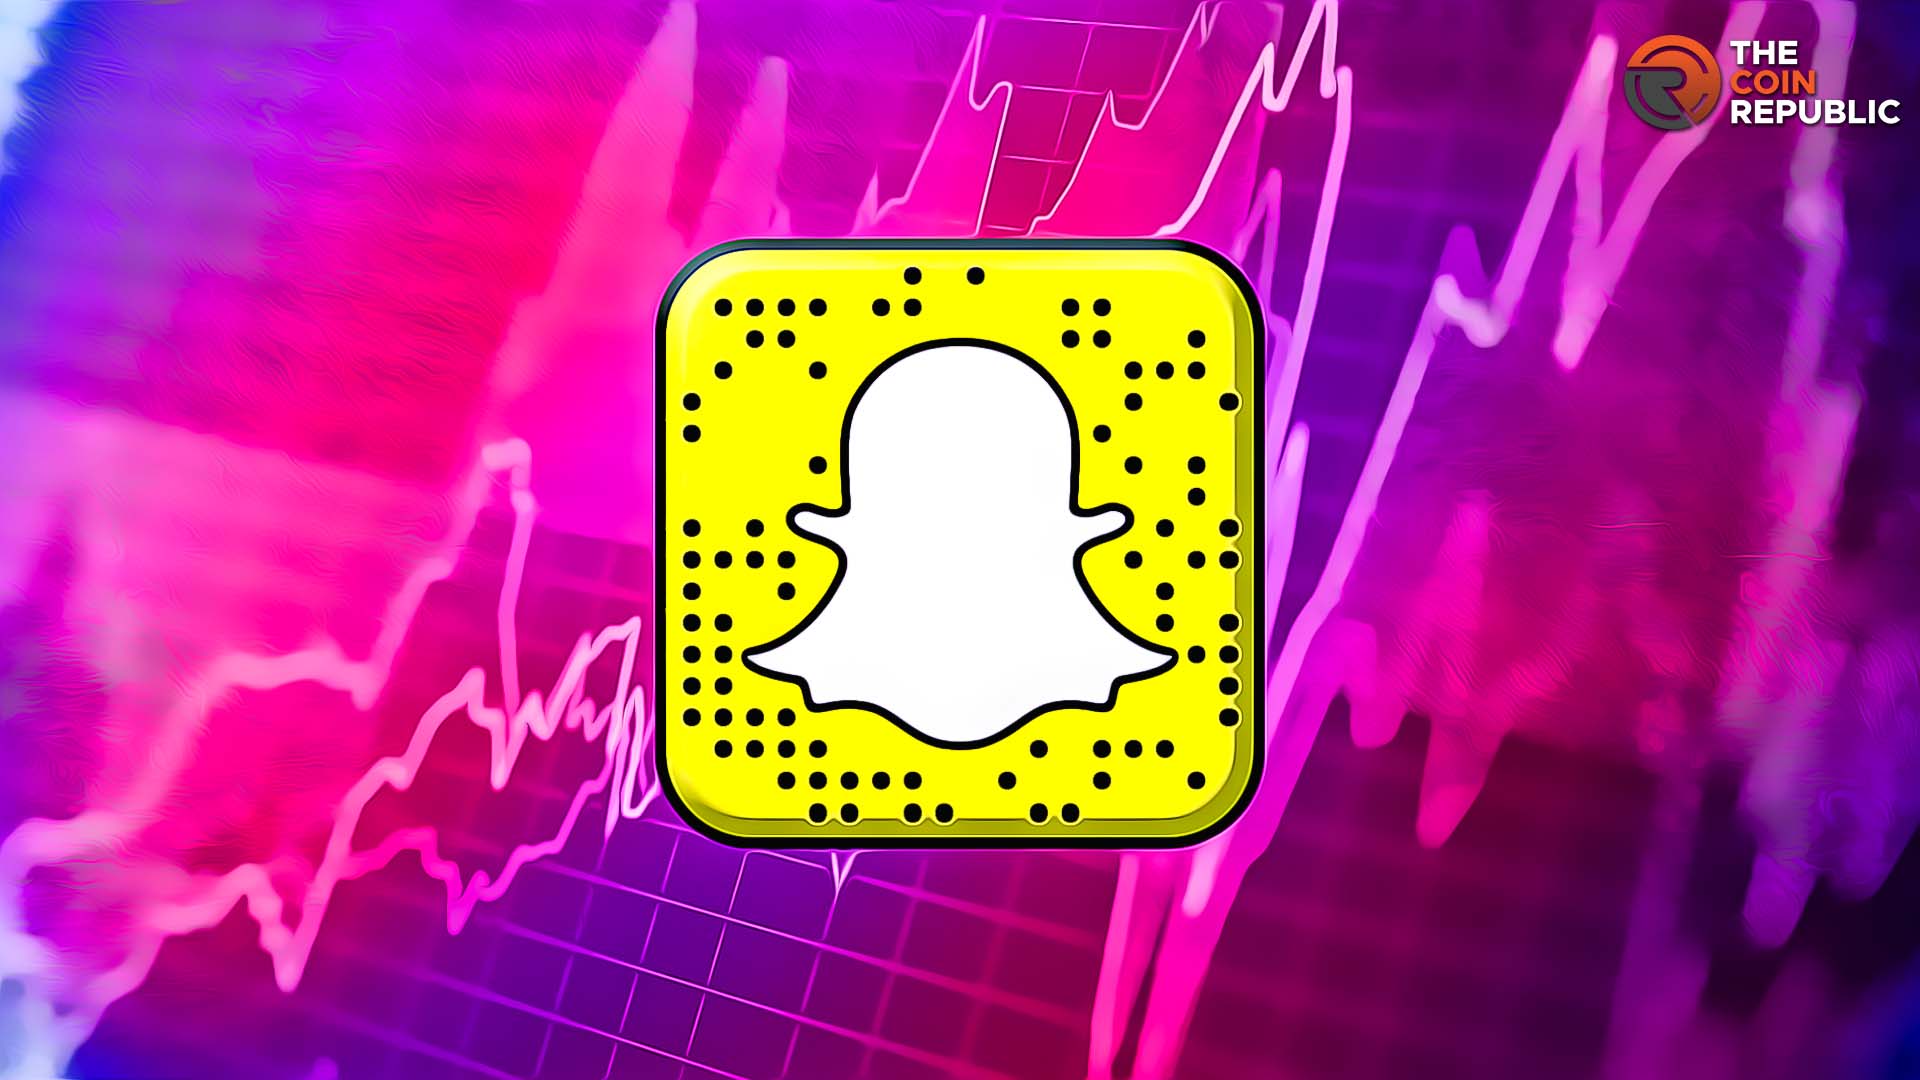 Snap Stock Slipped Intraday; Will the Decline Continue?